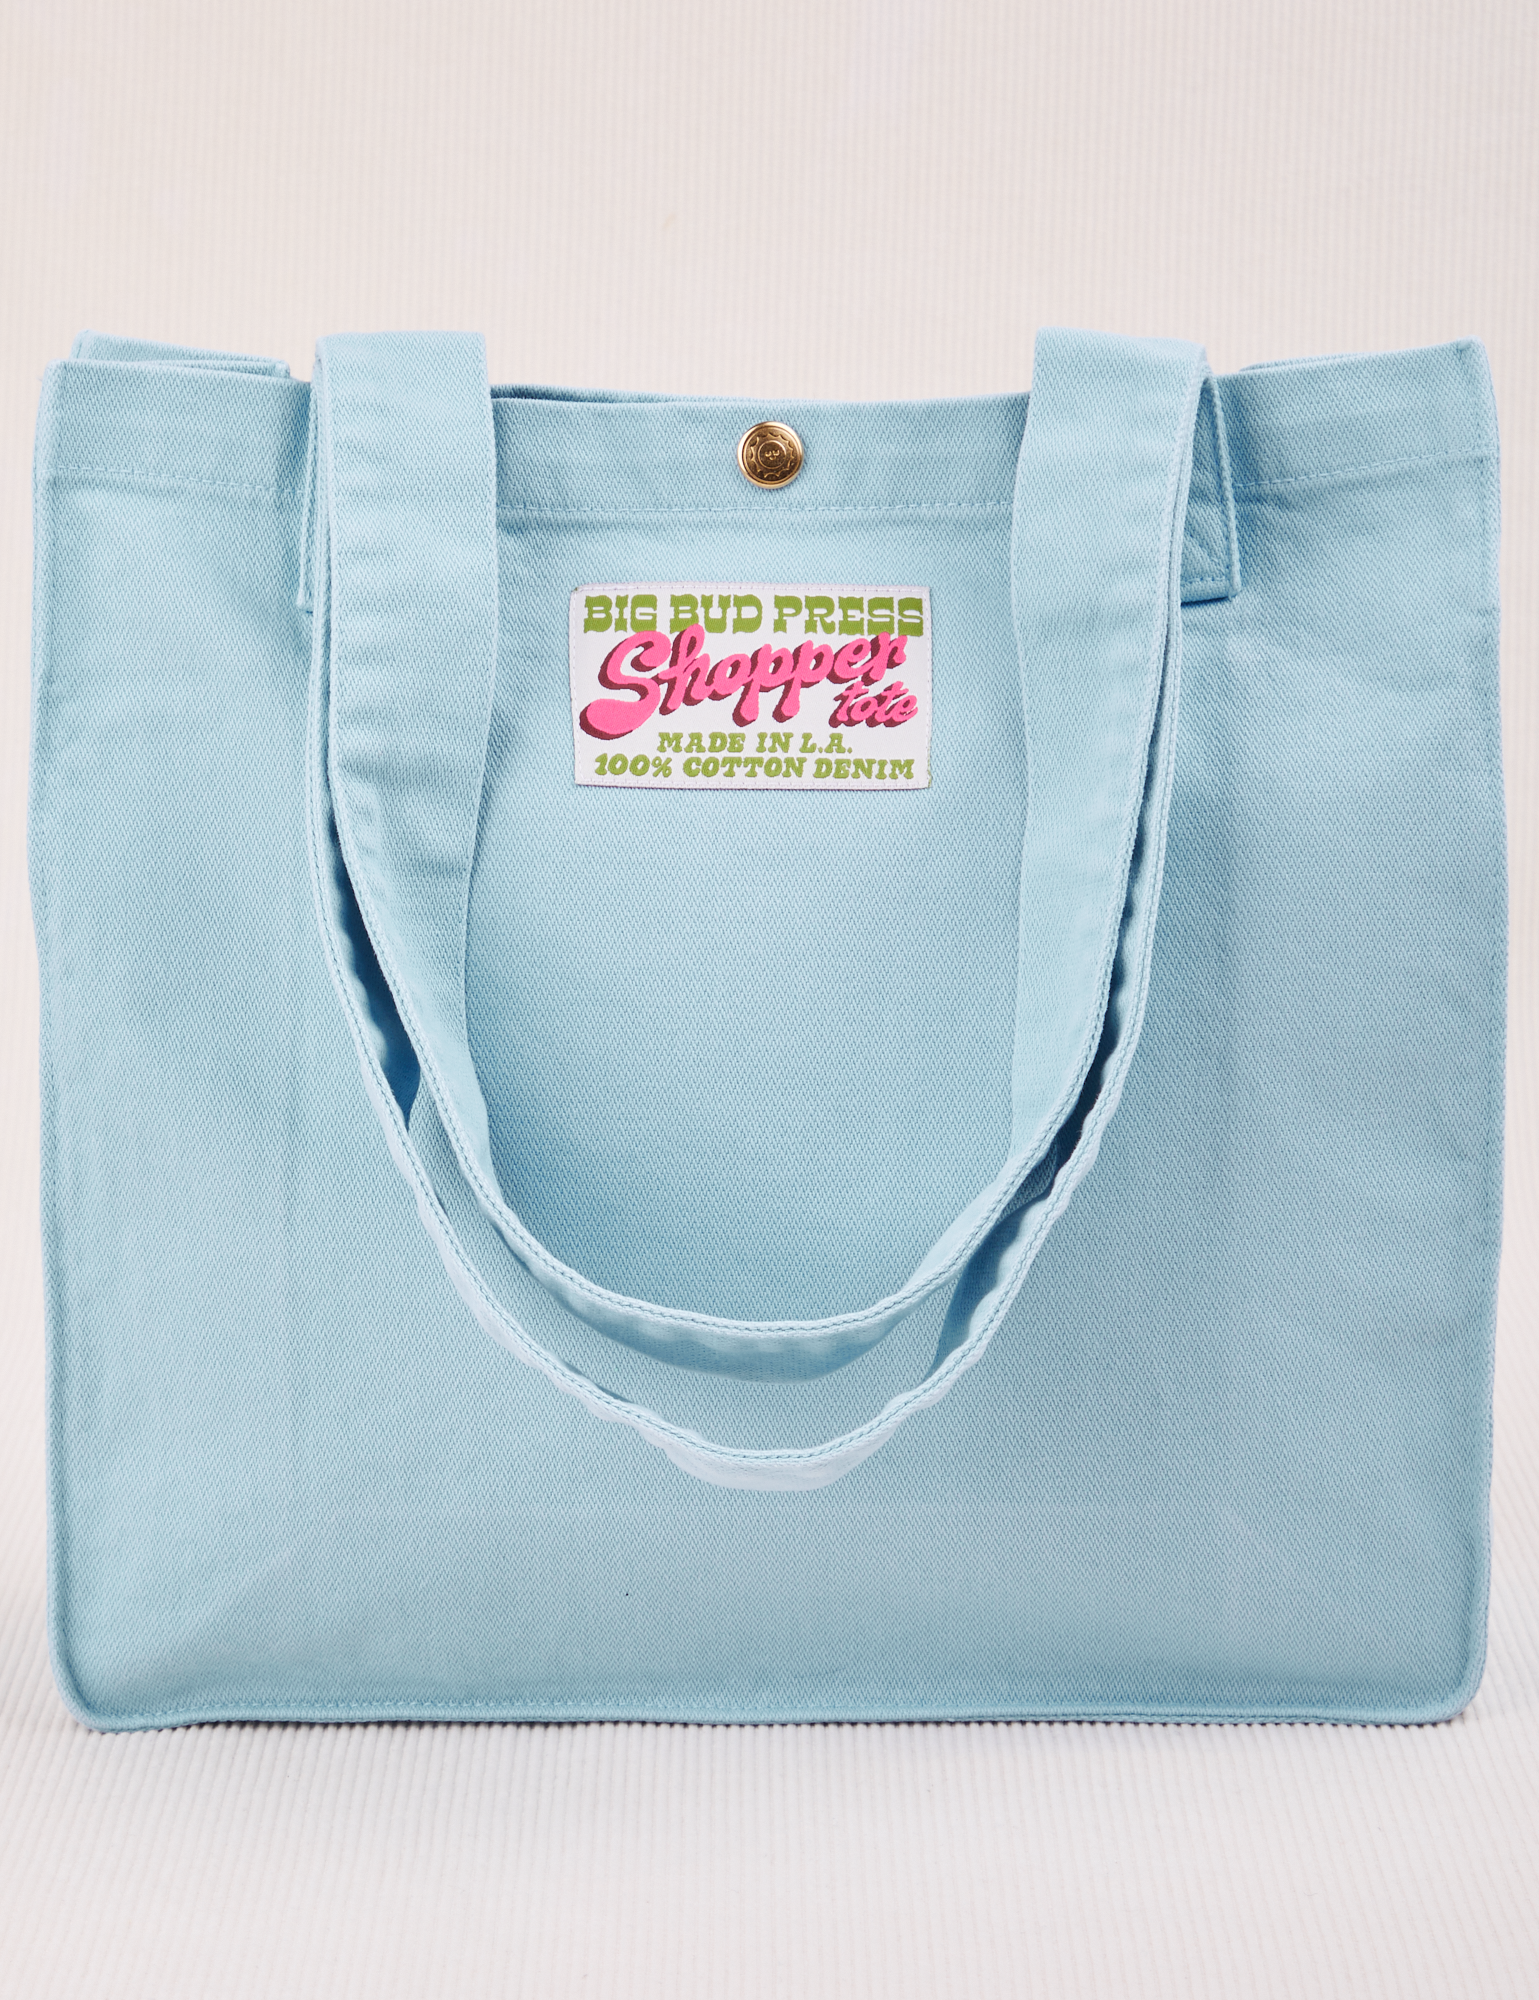 Shopper Tote Bag in Baby Blue with straps hanging down front of bag